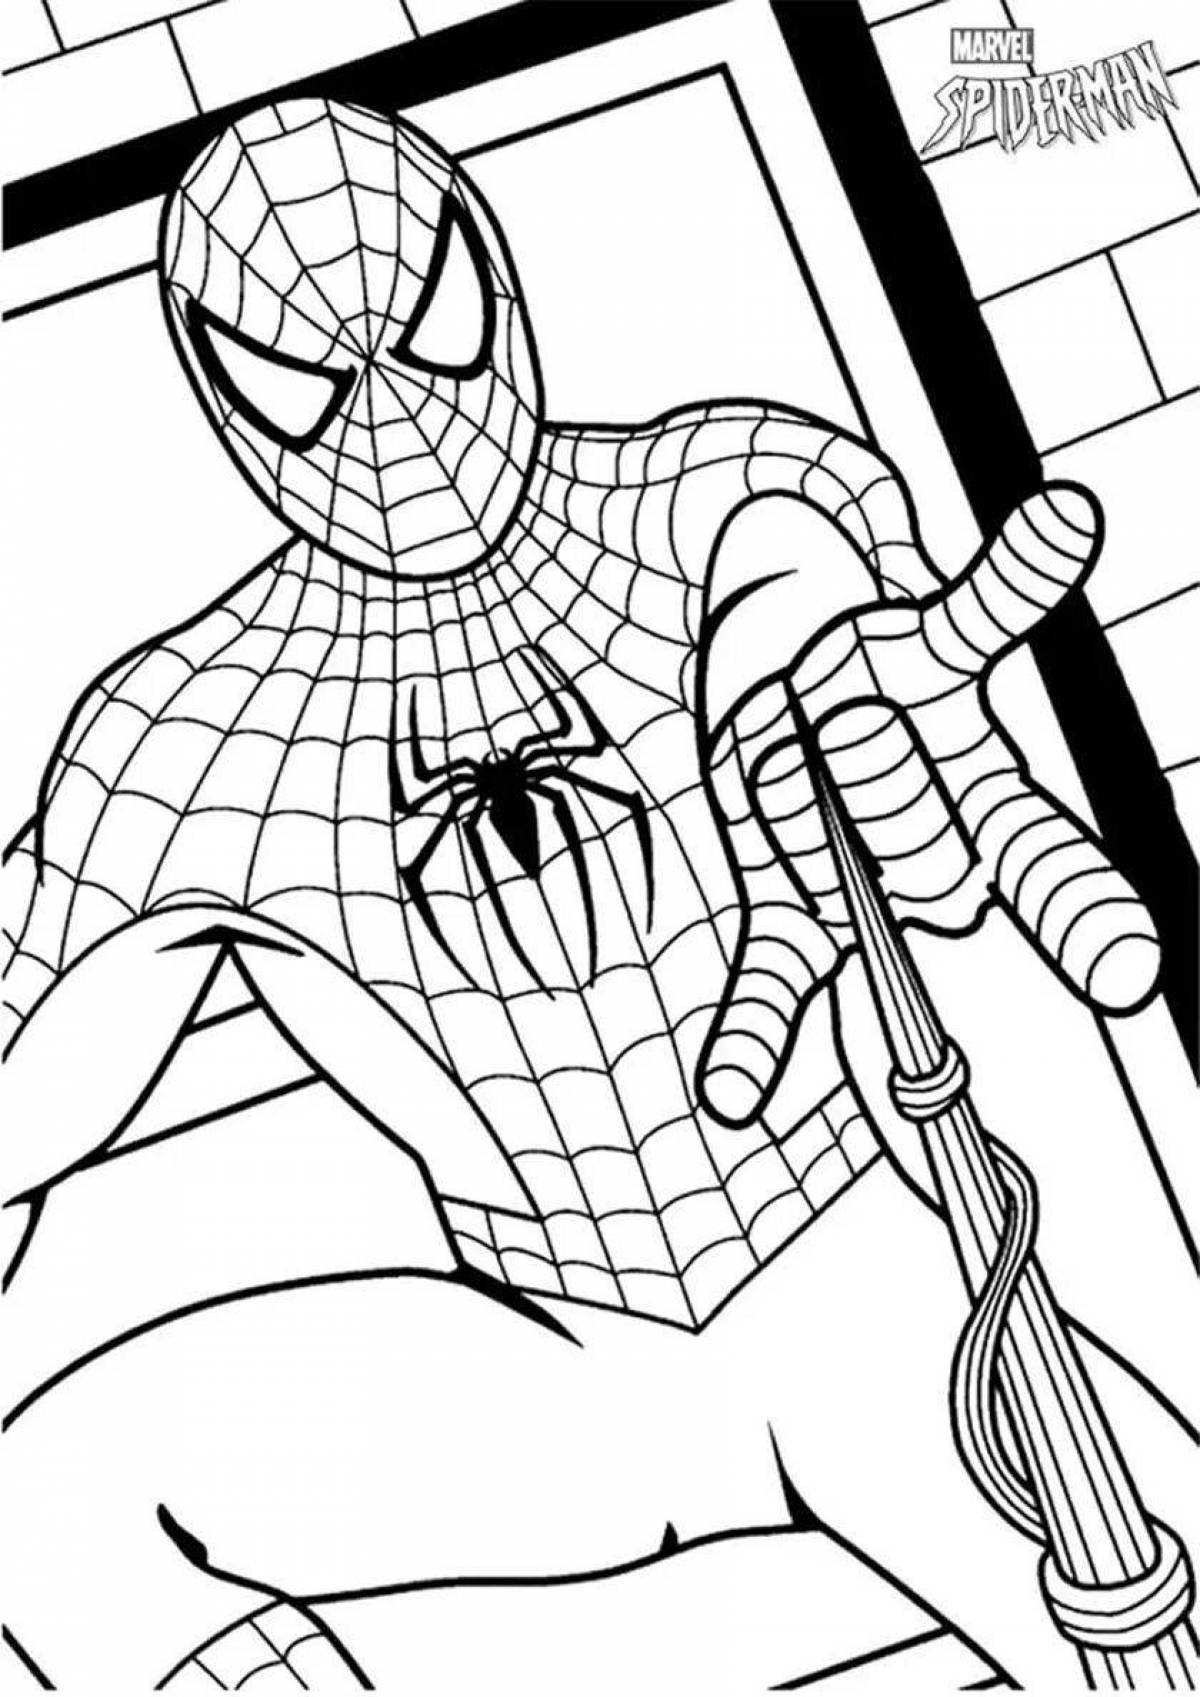 Charming spider-man coloring book